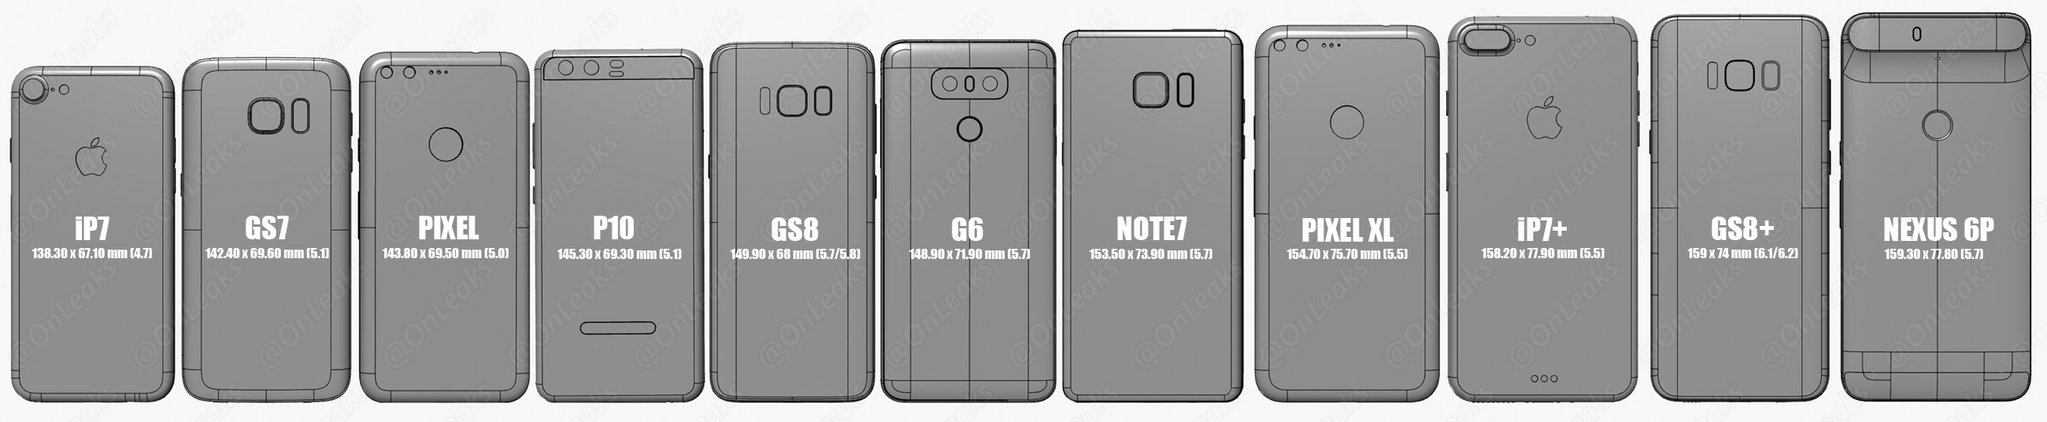 samsung-galaxy-s8-and-s8-plus-size-compared-with-other-flagships-513749-3.jpg